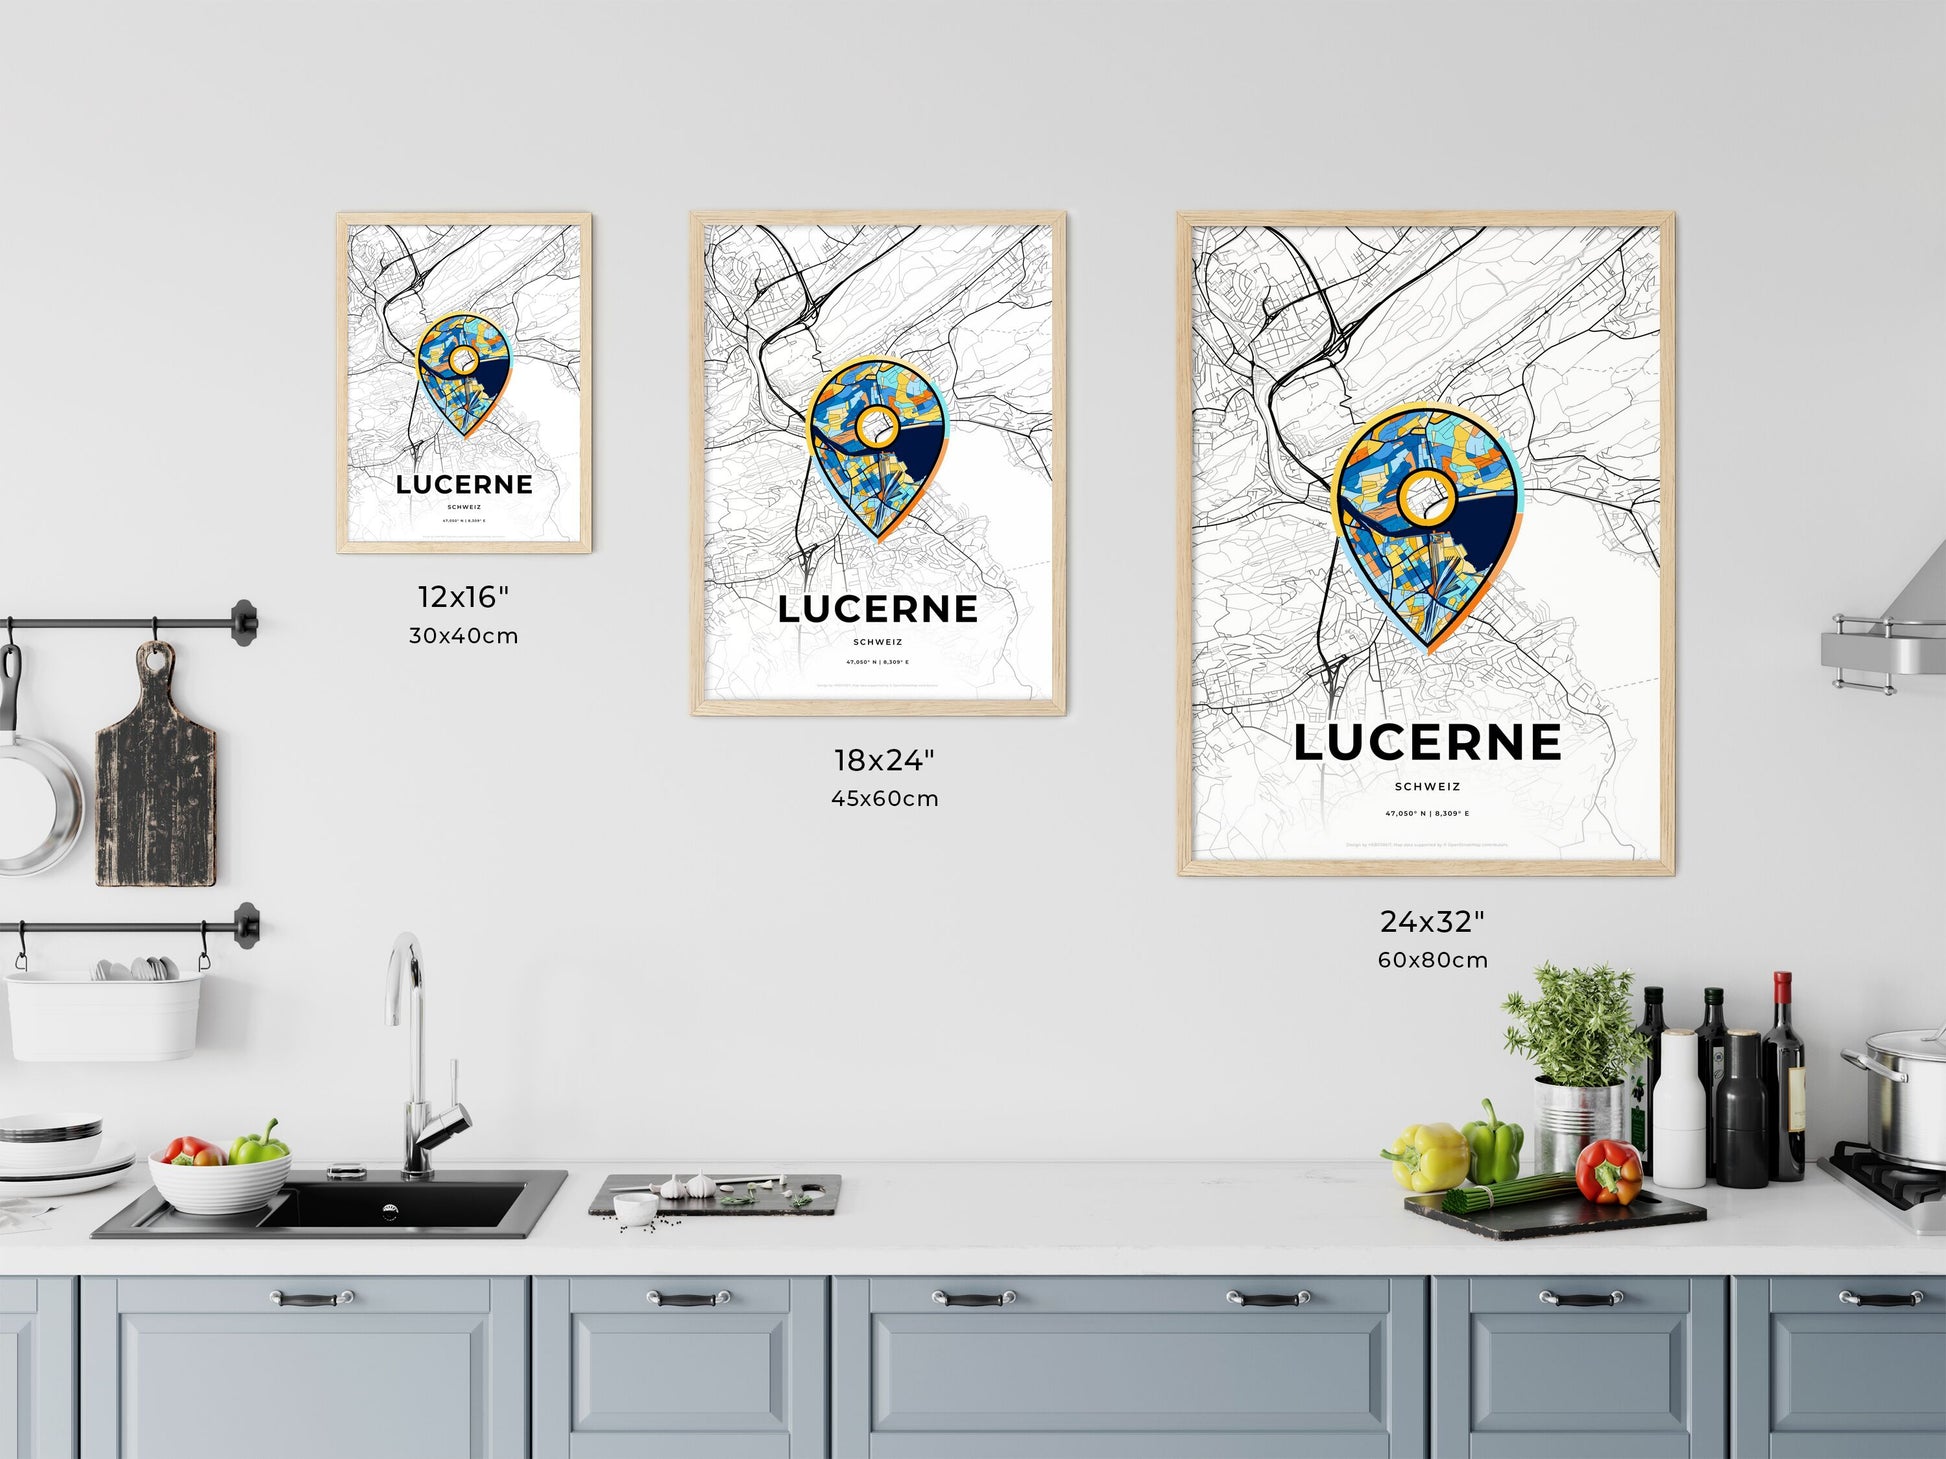 LUCERNE SWITZERLAND minimal art map with a colorful icon. Where it all began, Couple map gift.